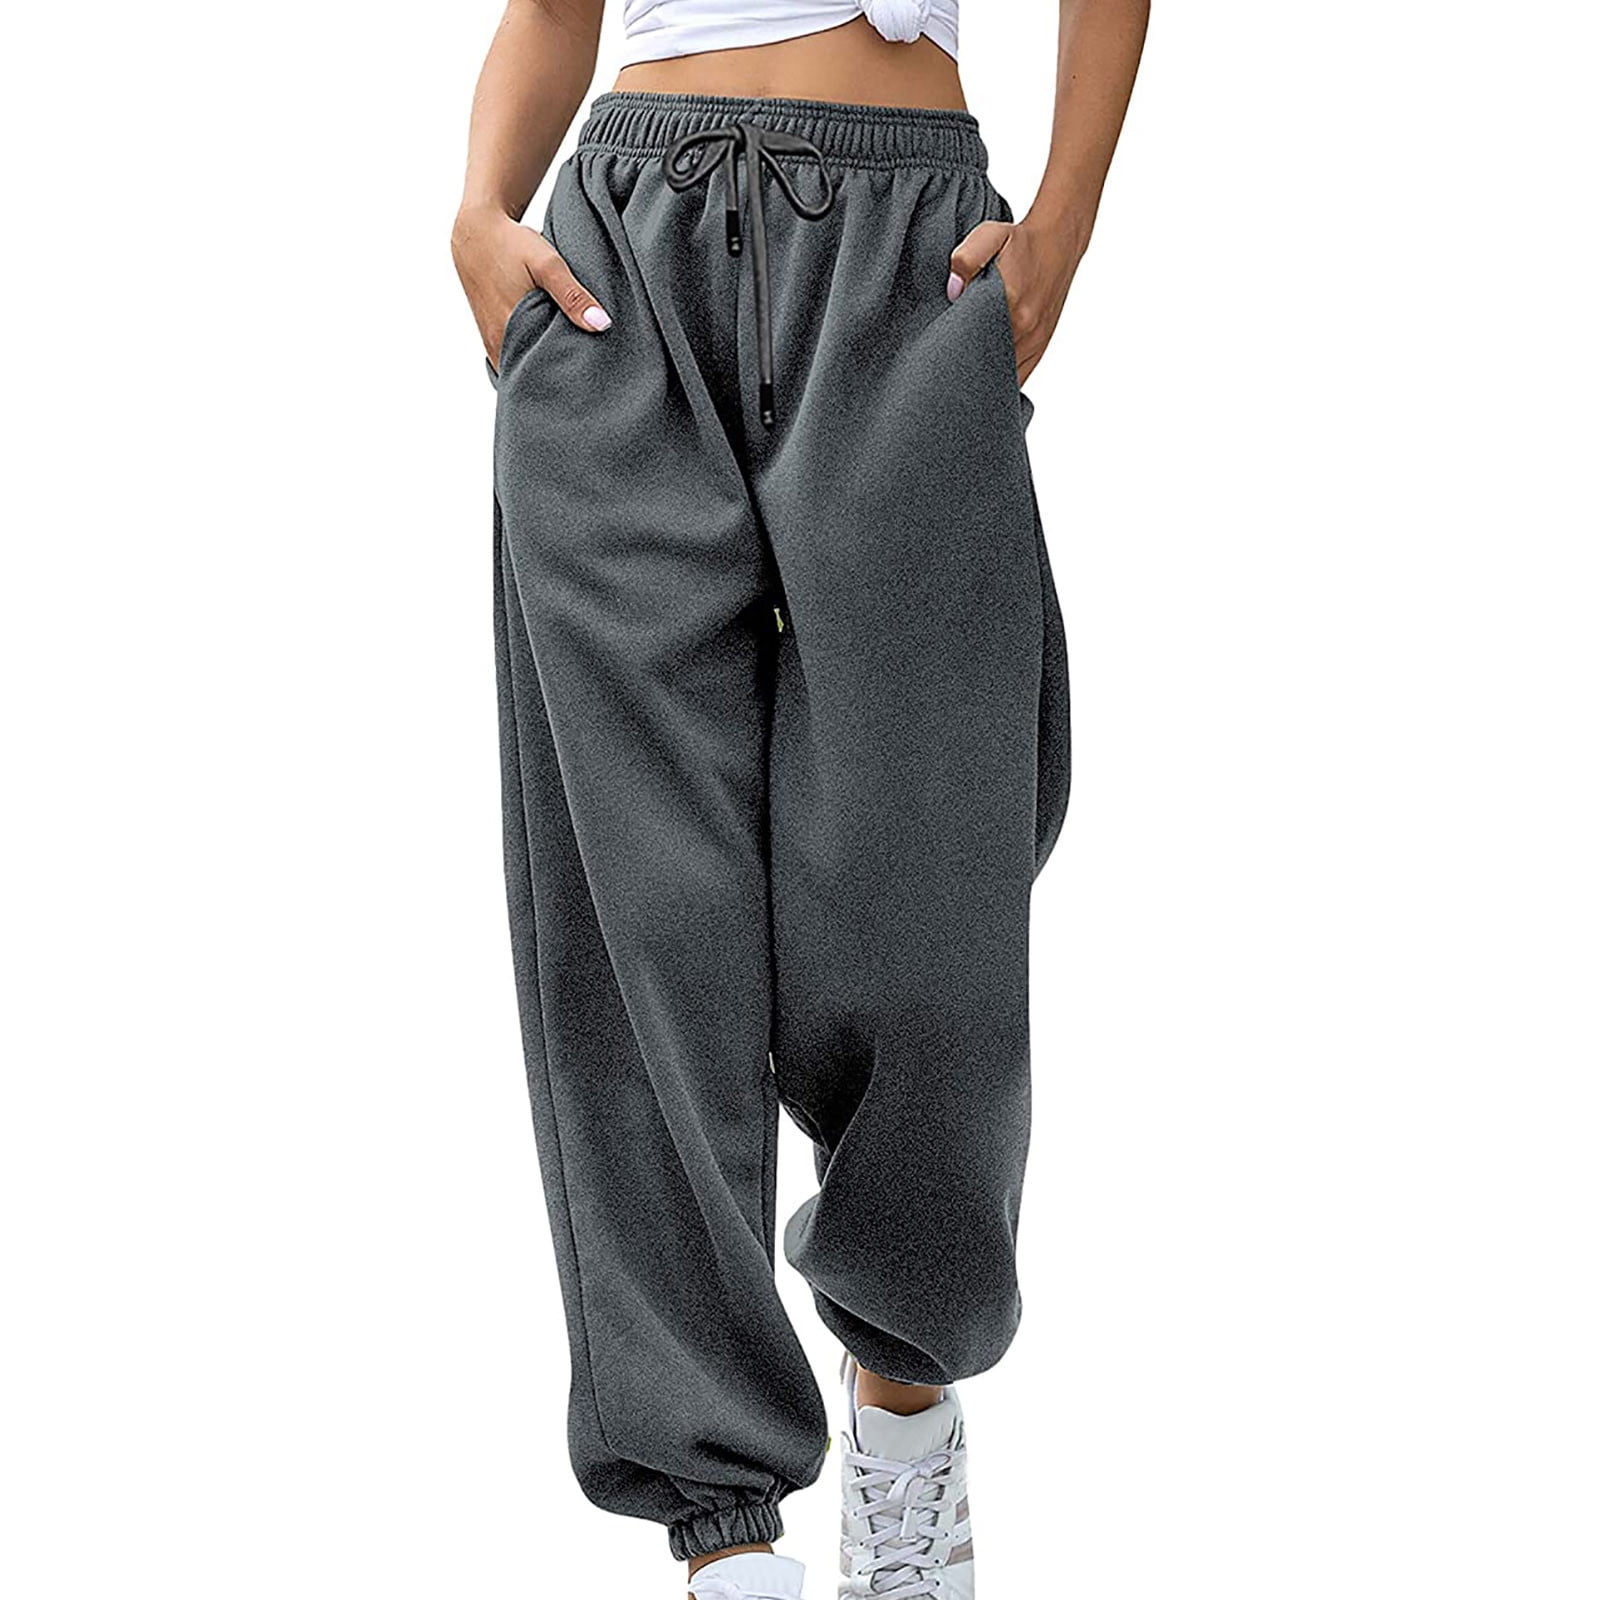 Buy KASSUALLY Black Loose Fit Joggers online